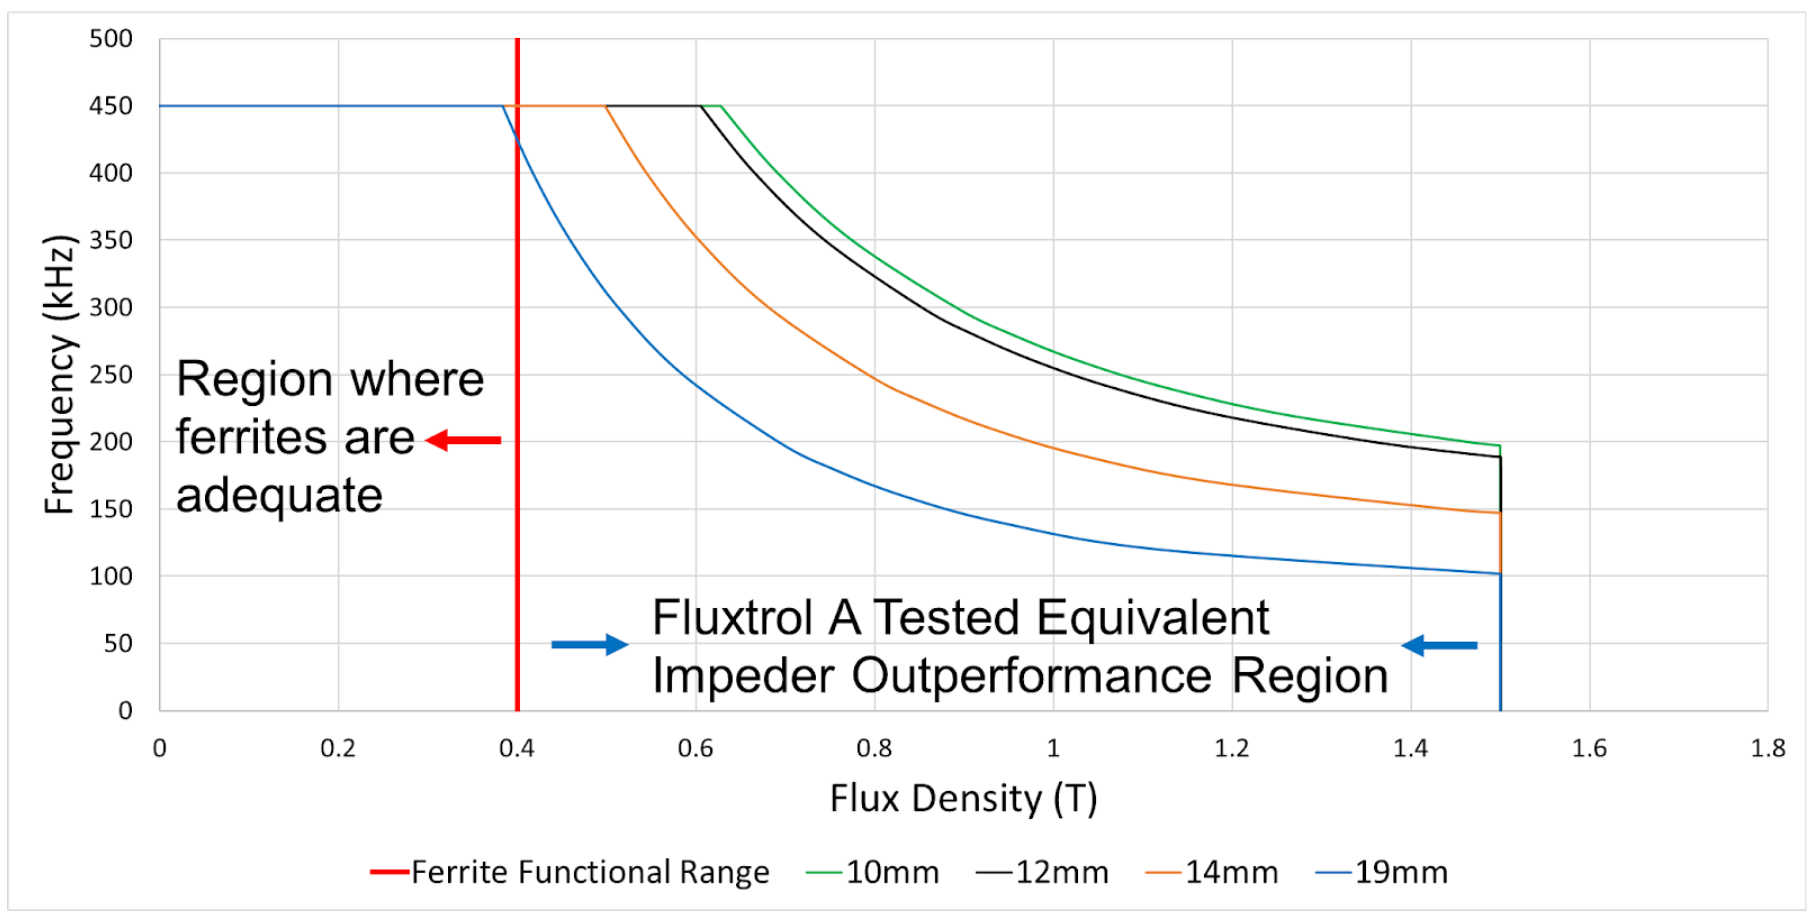 Fluxtrol | HES 23 Physical Simulation and Computational Modelling for Validation of Soft Magnetic Composite Impeder Performance - Figure 3: Fluxtrol A operational envelope